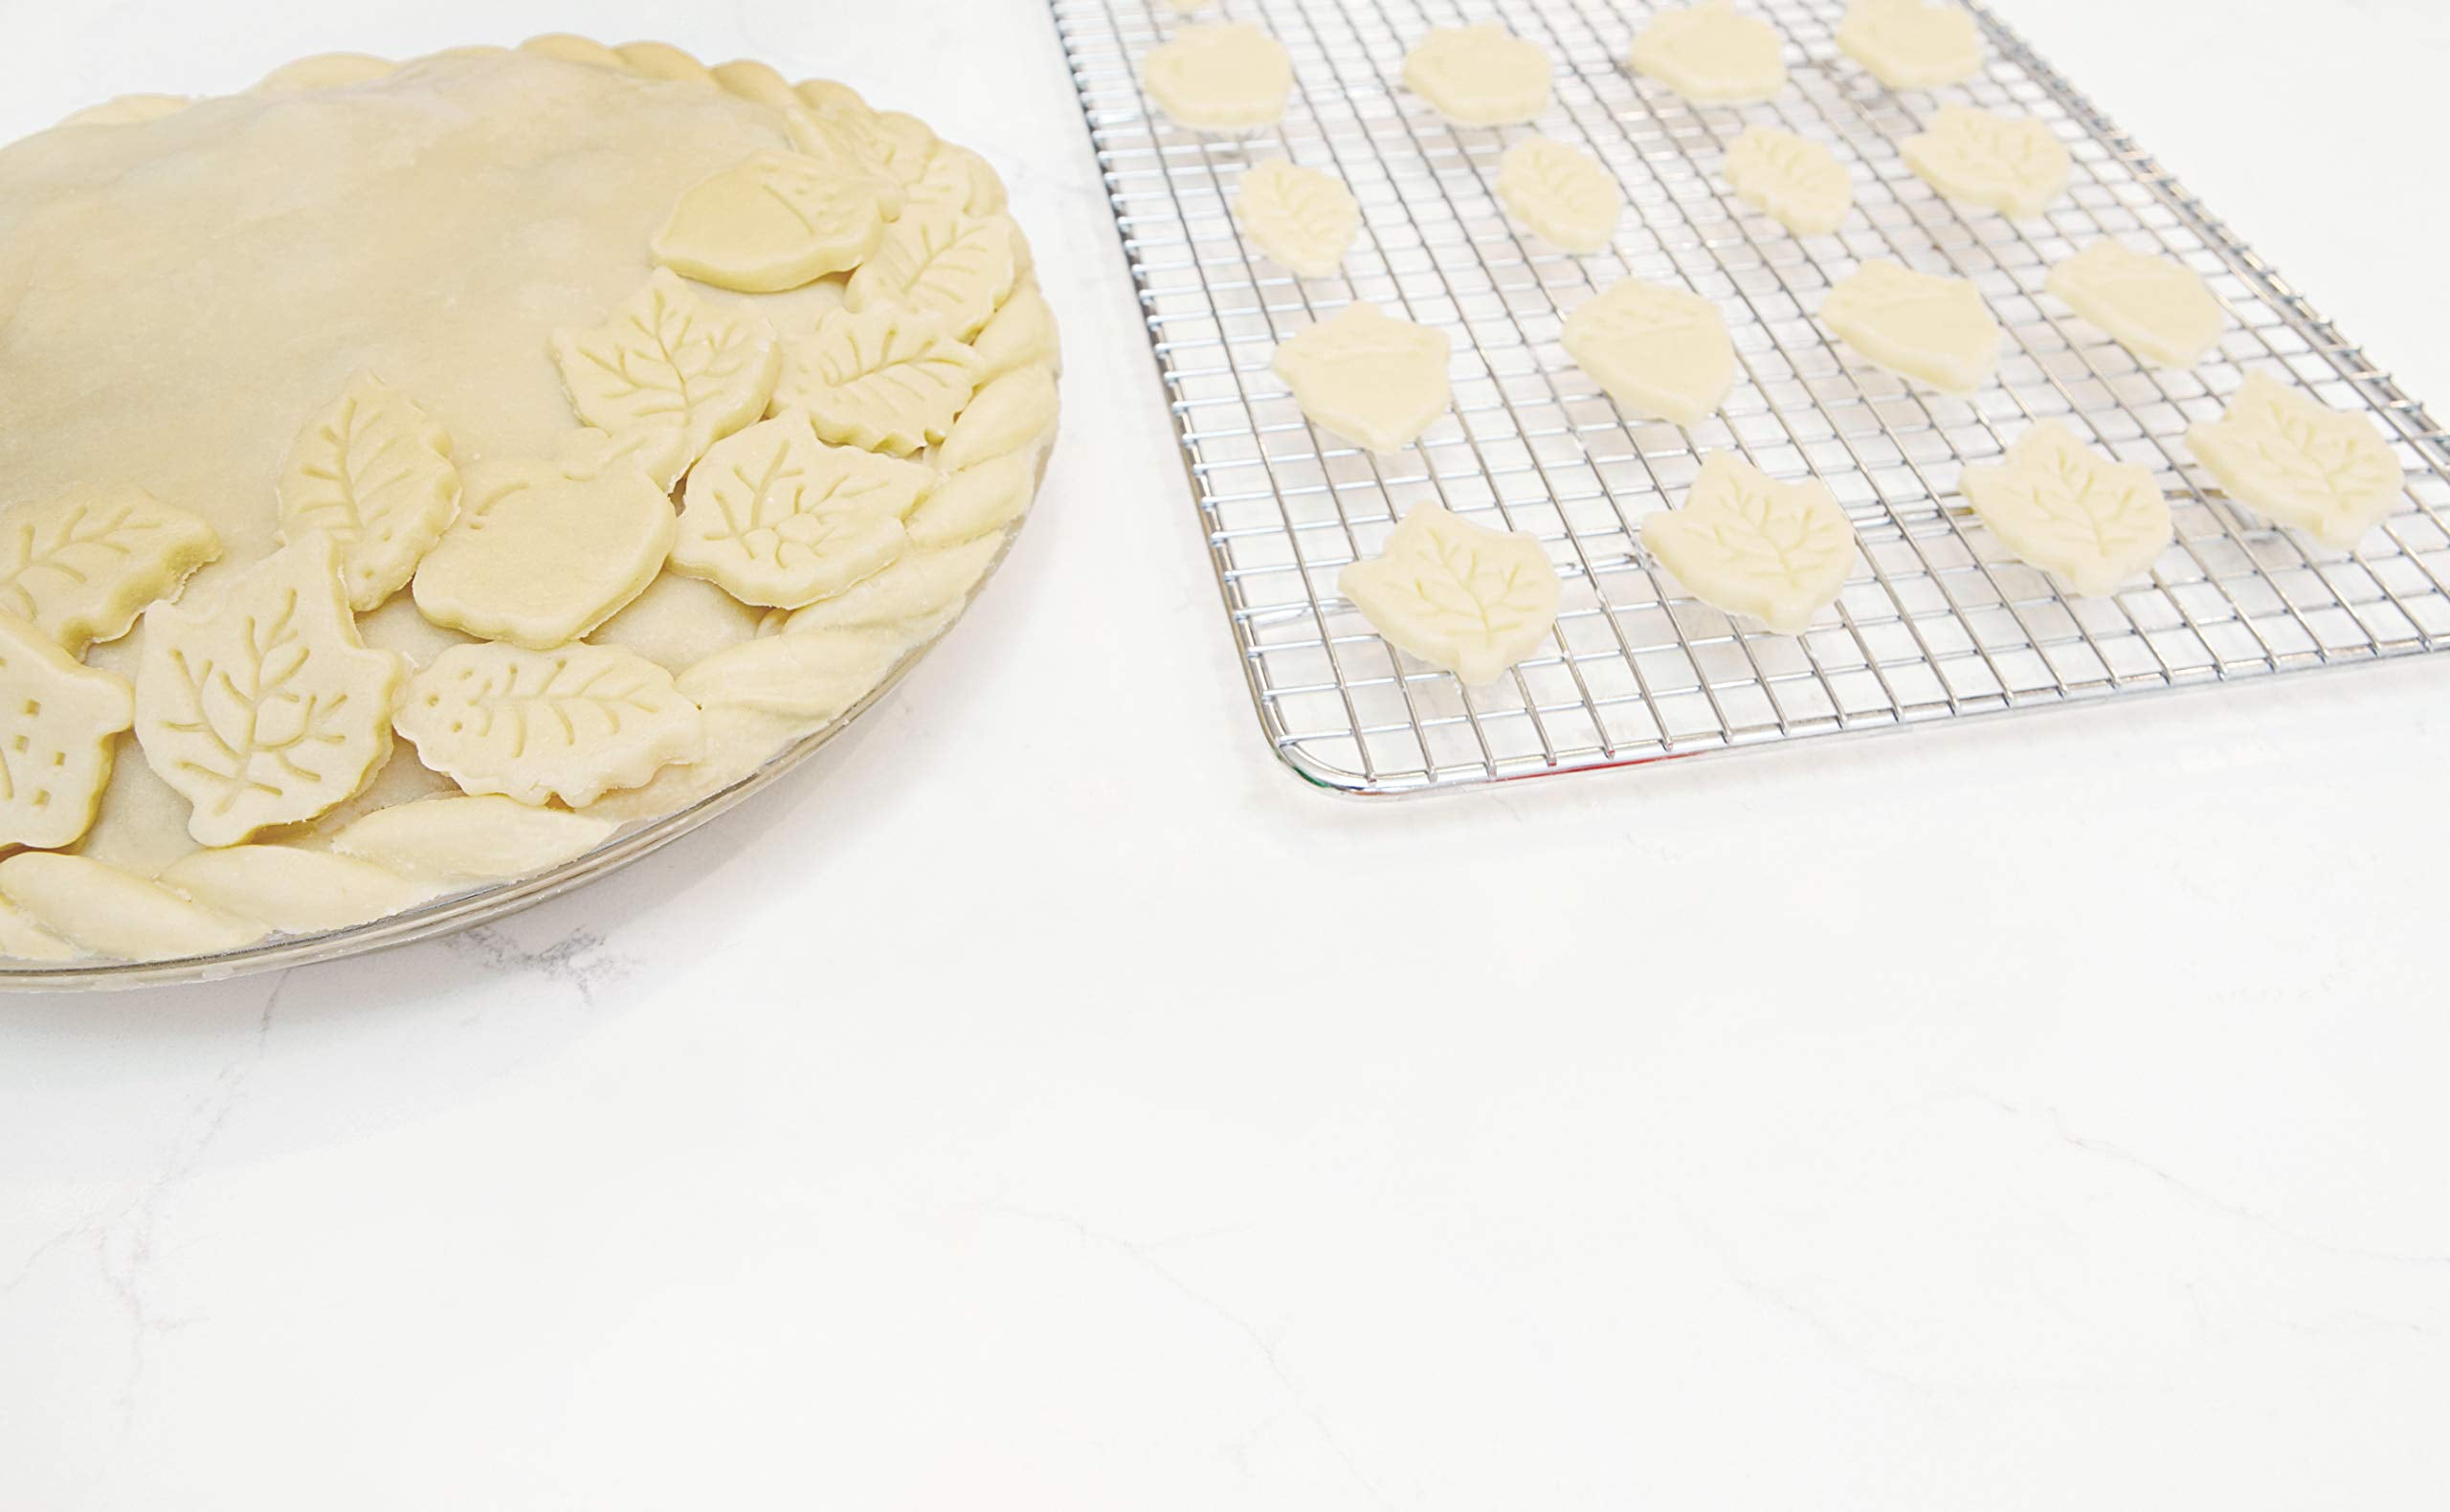 Shaped Pie Crust/Cookie Cutters - Charleston Wrap